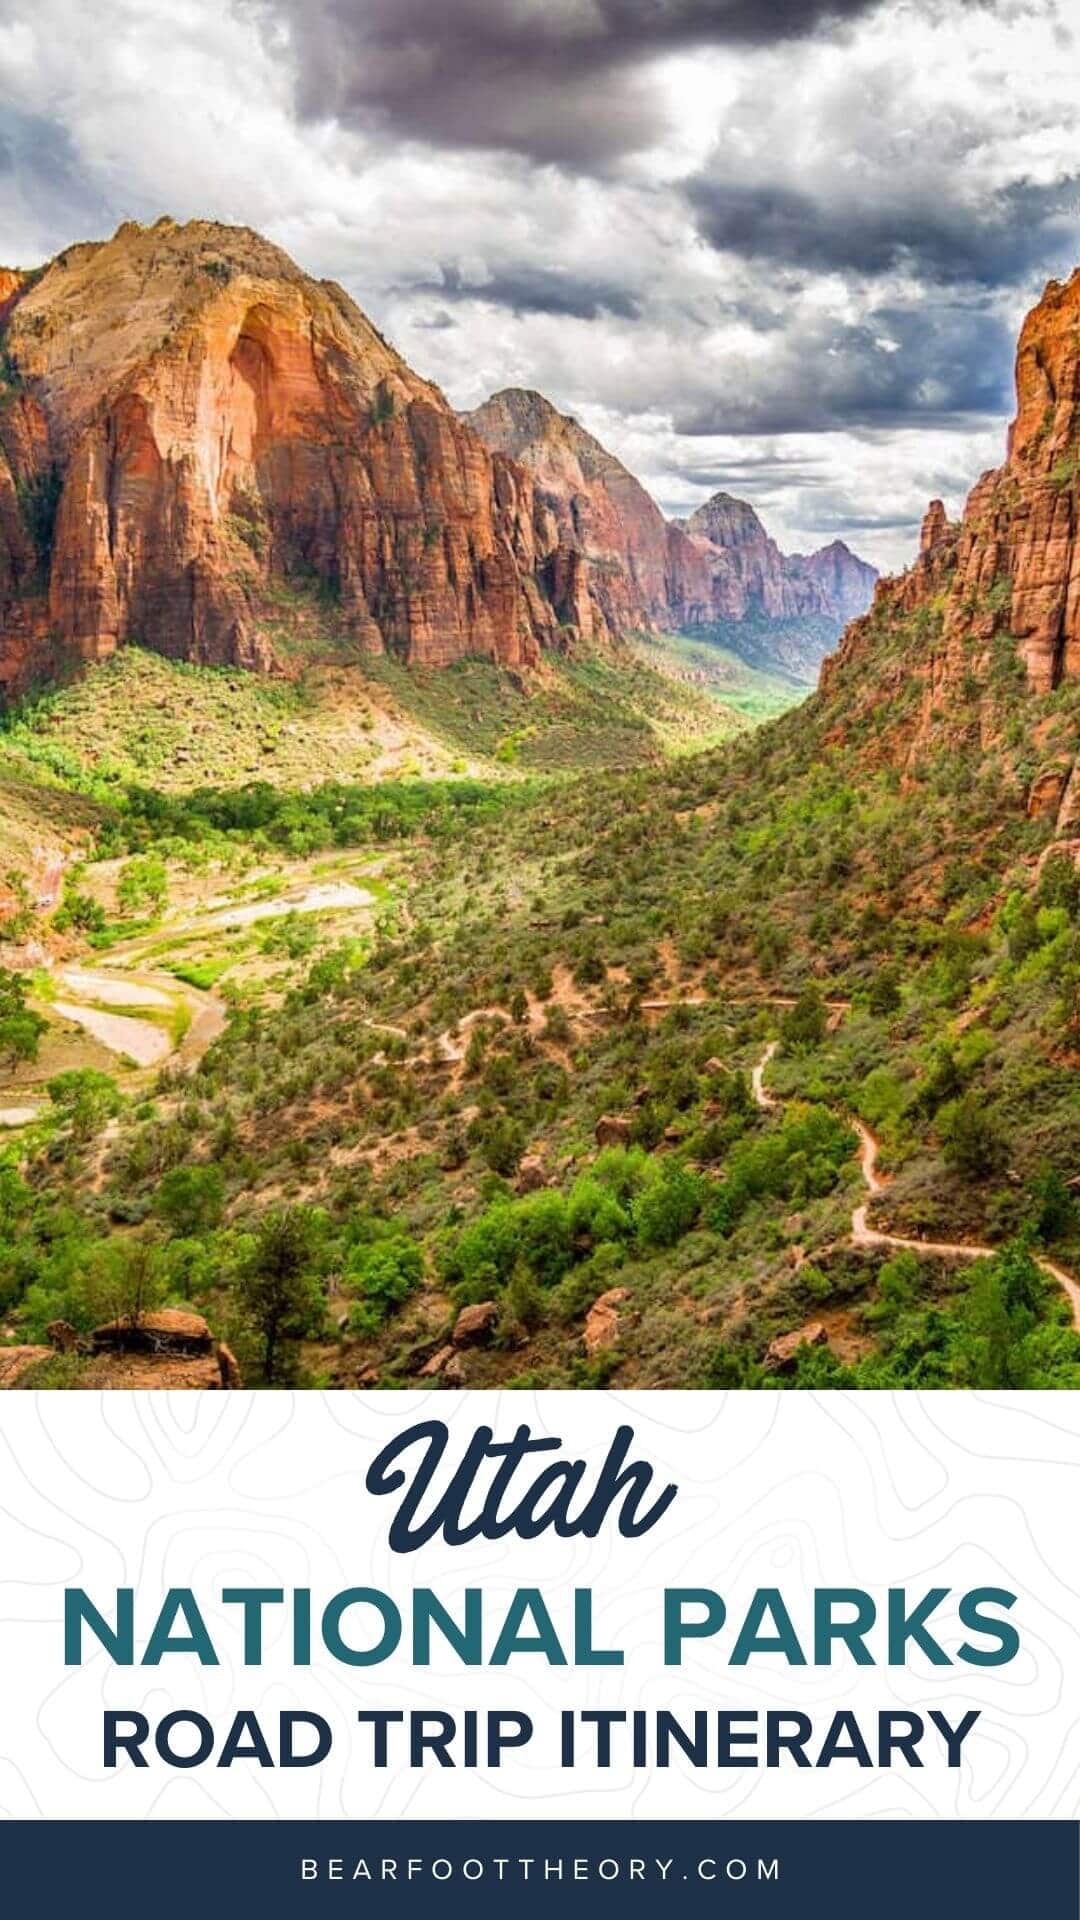 Plan an epic adventure with this 9-day Utah National Parks road trip itinerary and get tips on the best hikes, camping, lodging, and more.